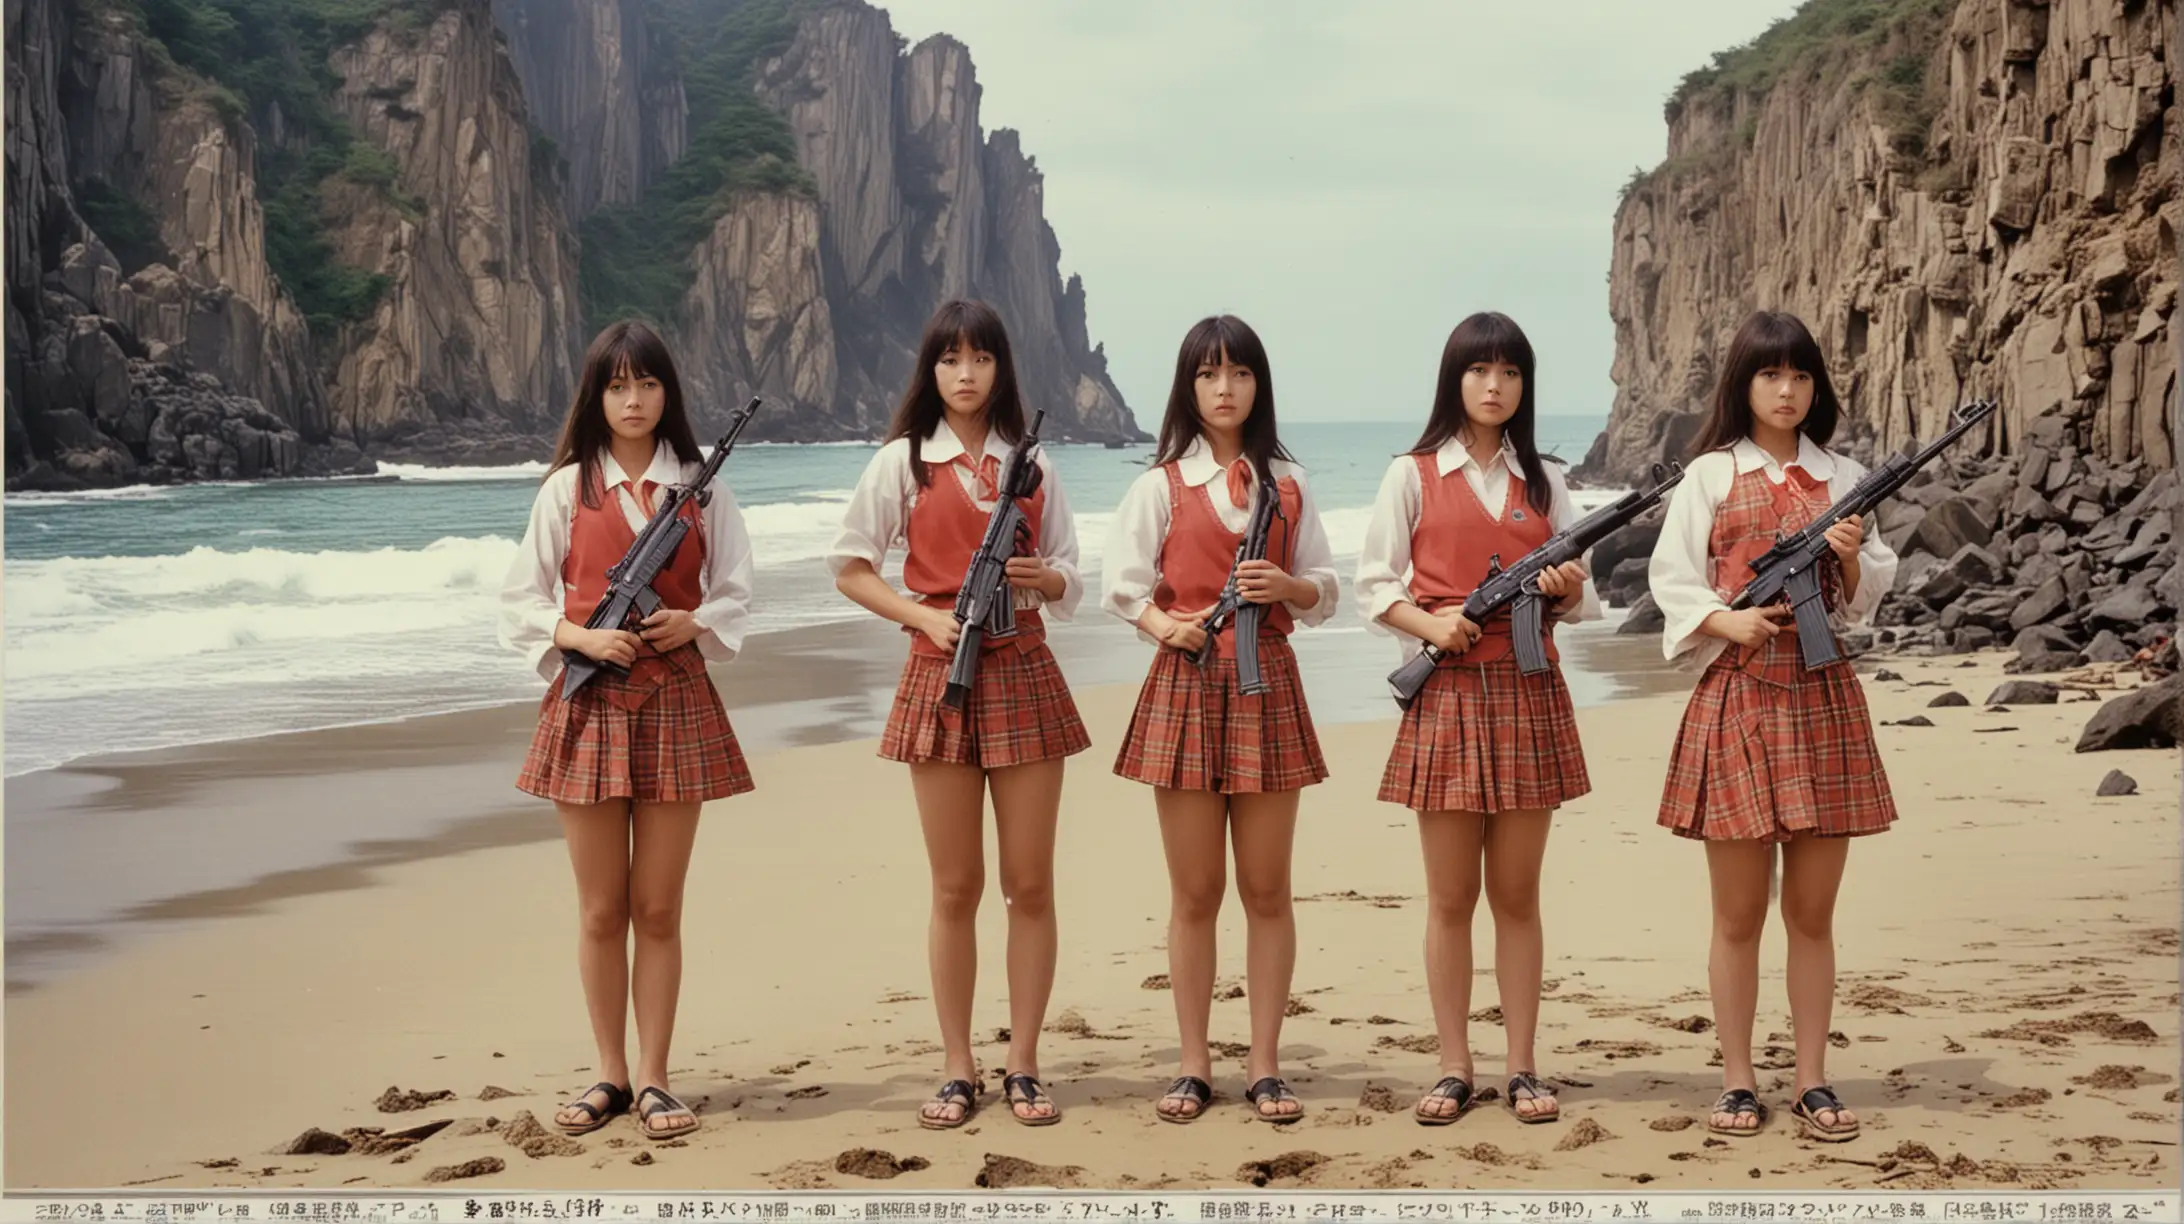 real photo lobby card for 1970s Japanese exploitation film, with seifuku girls on a beach, girls each holding various firearms, cliffs in the distance, title is “Death Game” printed at top 